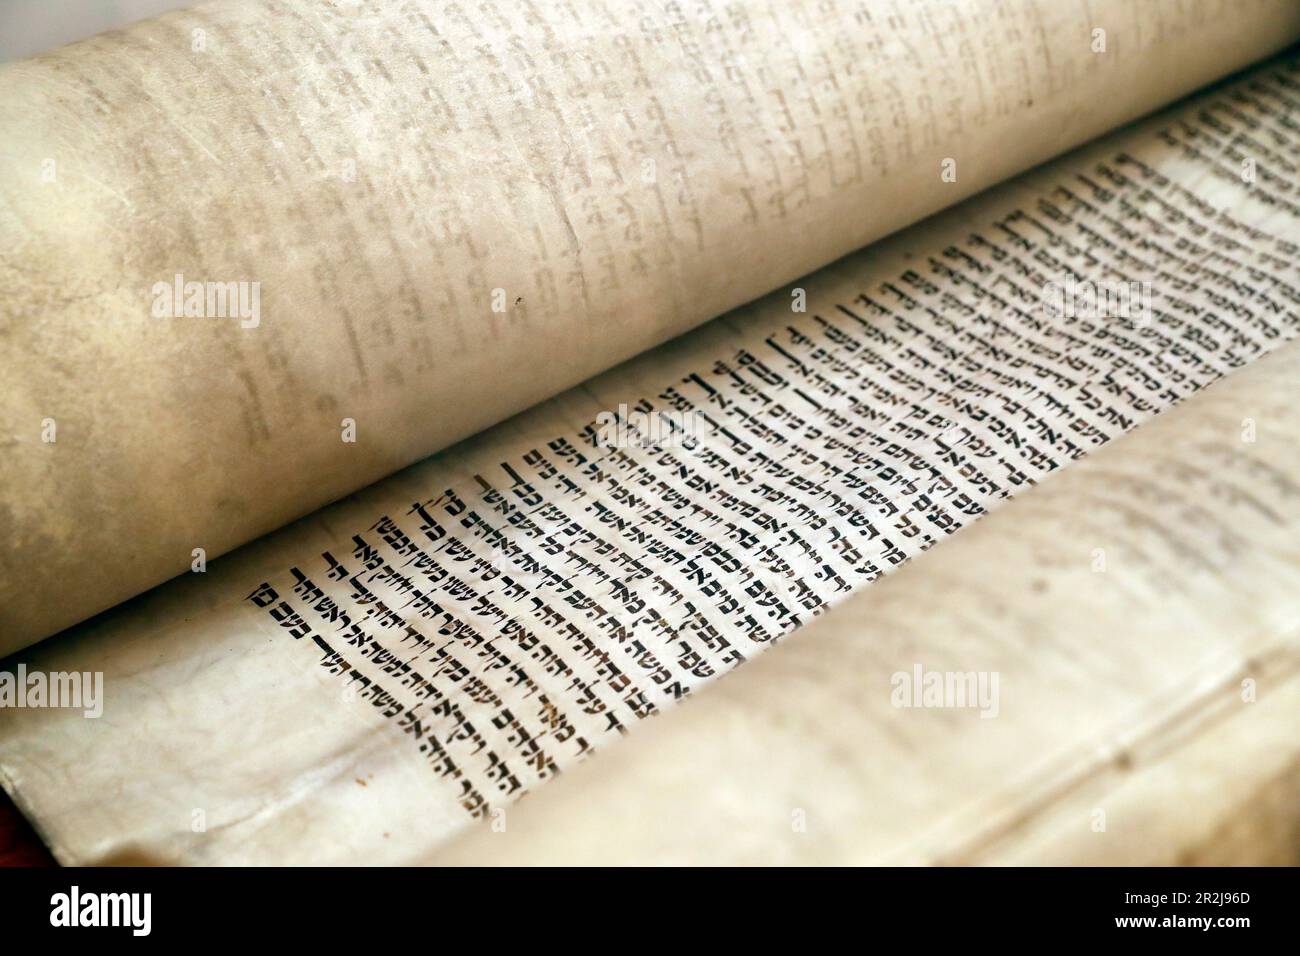 Close-up detail of traditional old Torah scroll book, Jewish Museum of Florida, Miami Beach, Florida, United States of America, North America Stock Photo